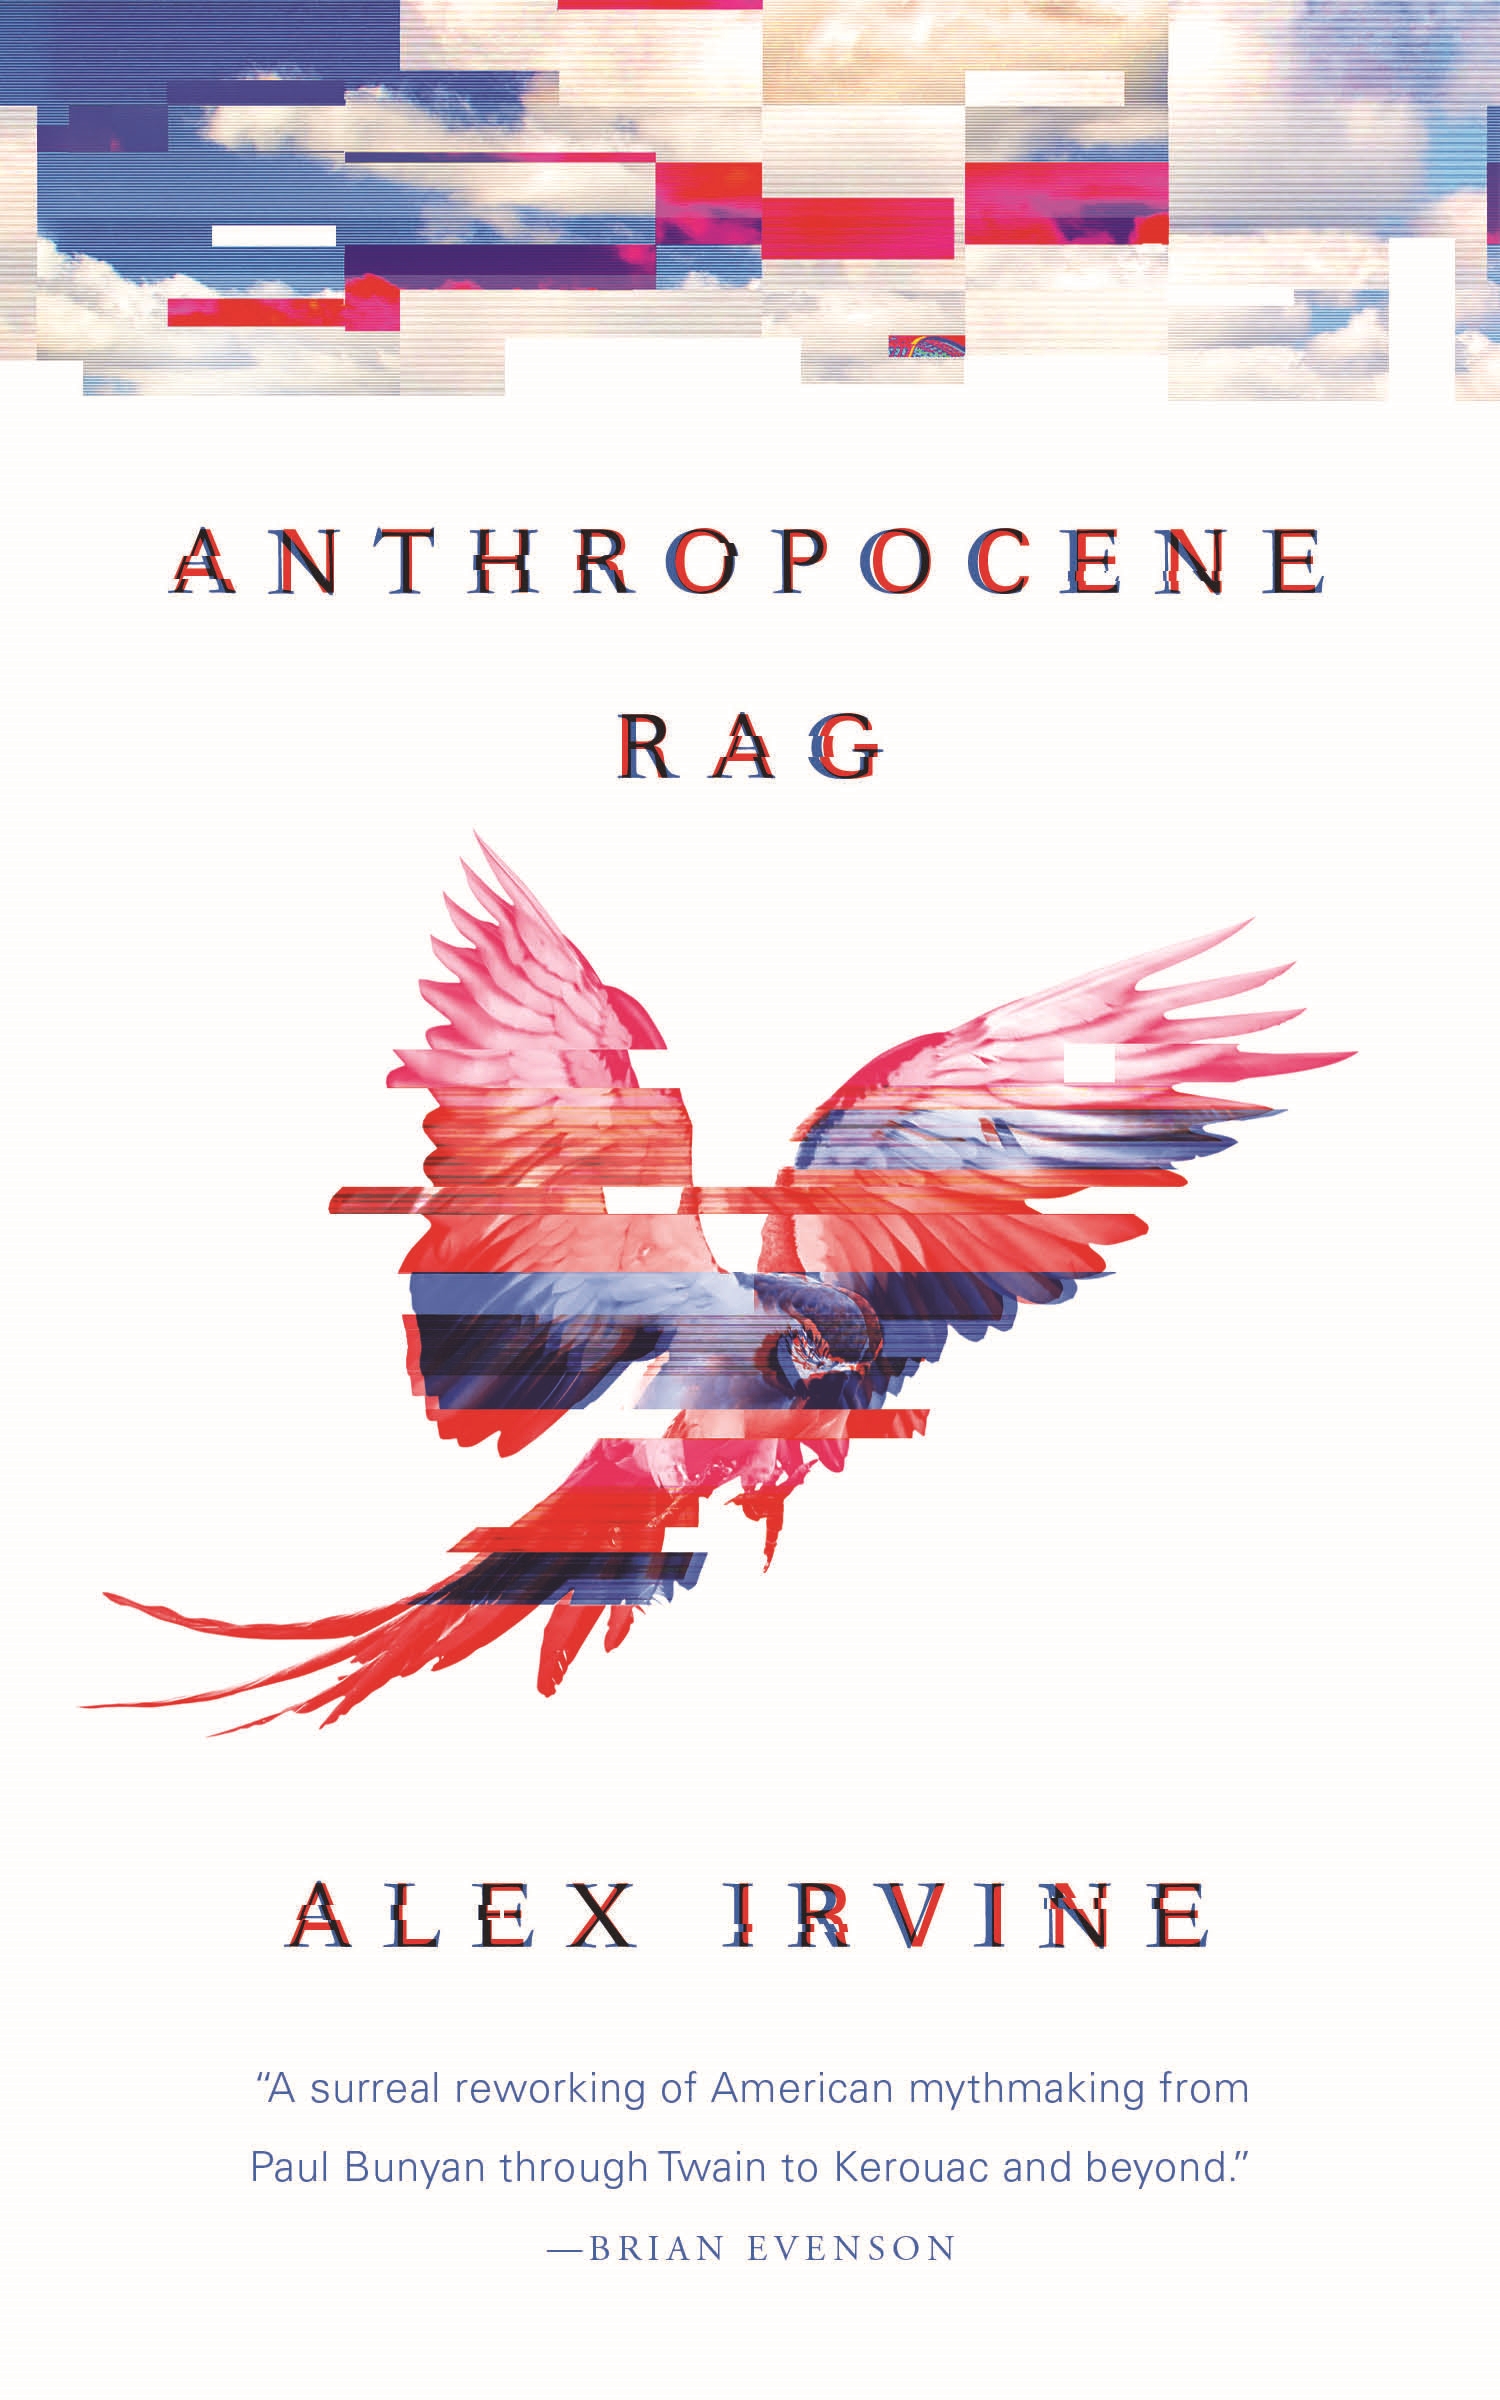 Anthropocene Rag Book Cover, title text with image of a glitching parrot underneath